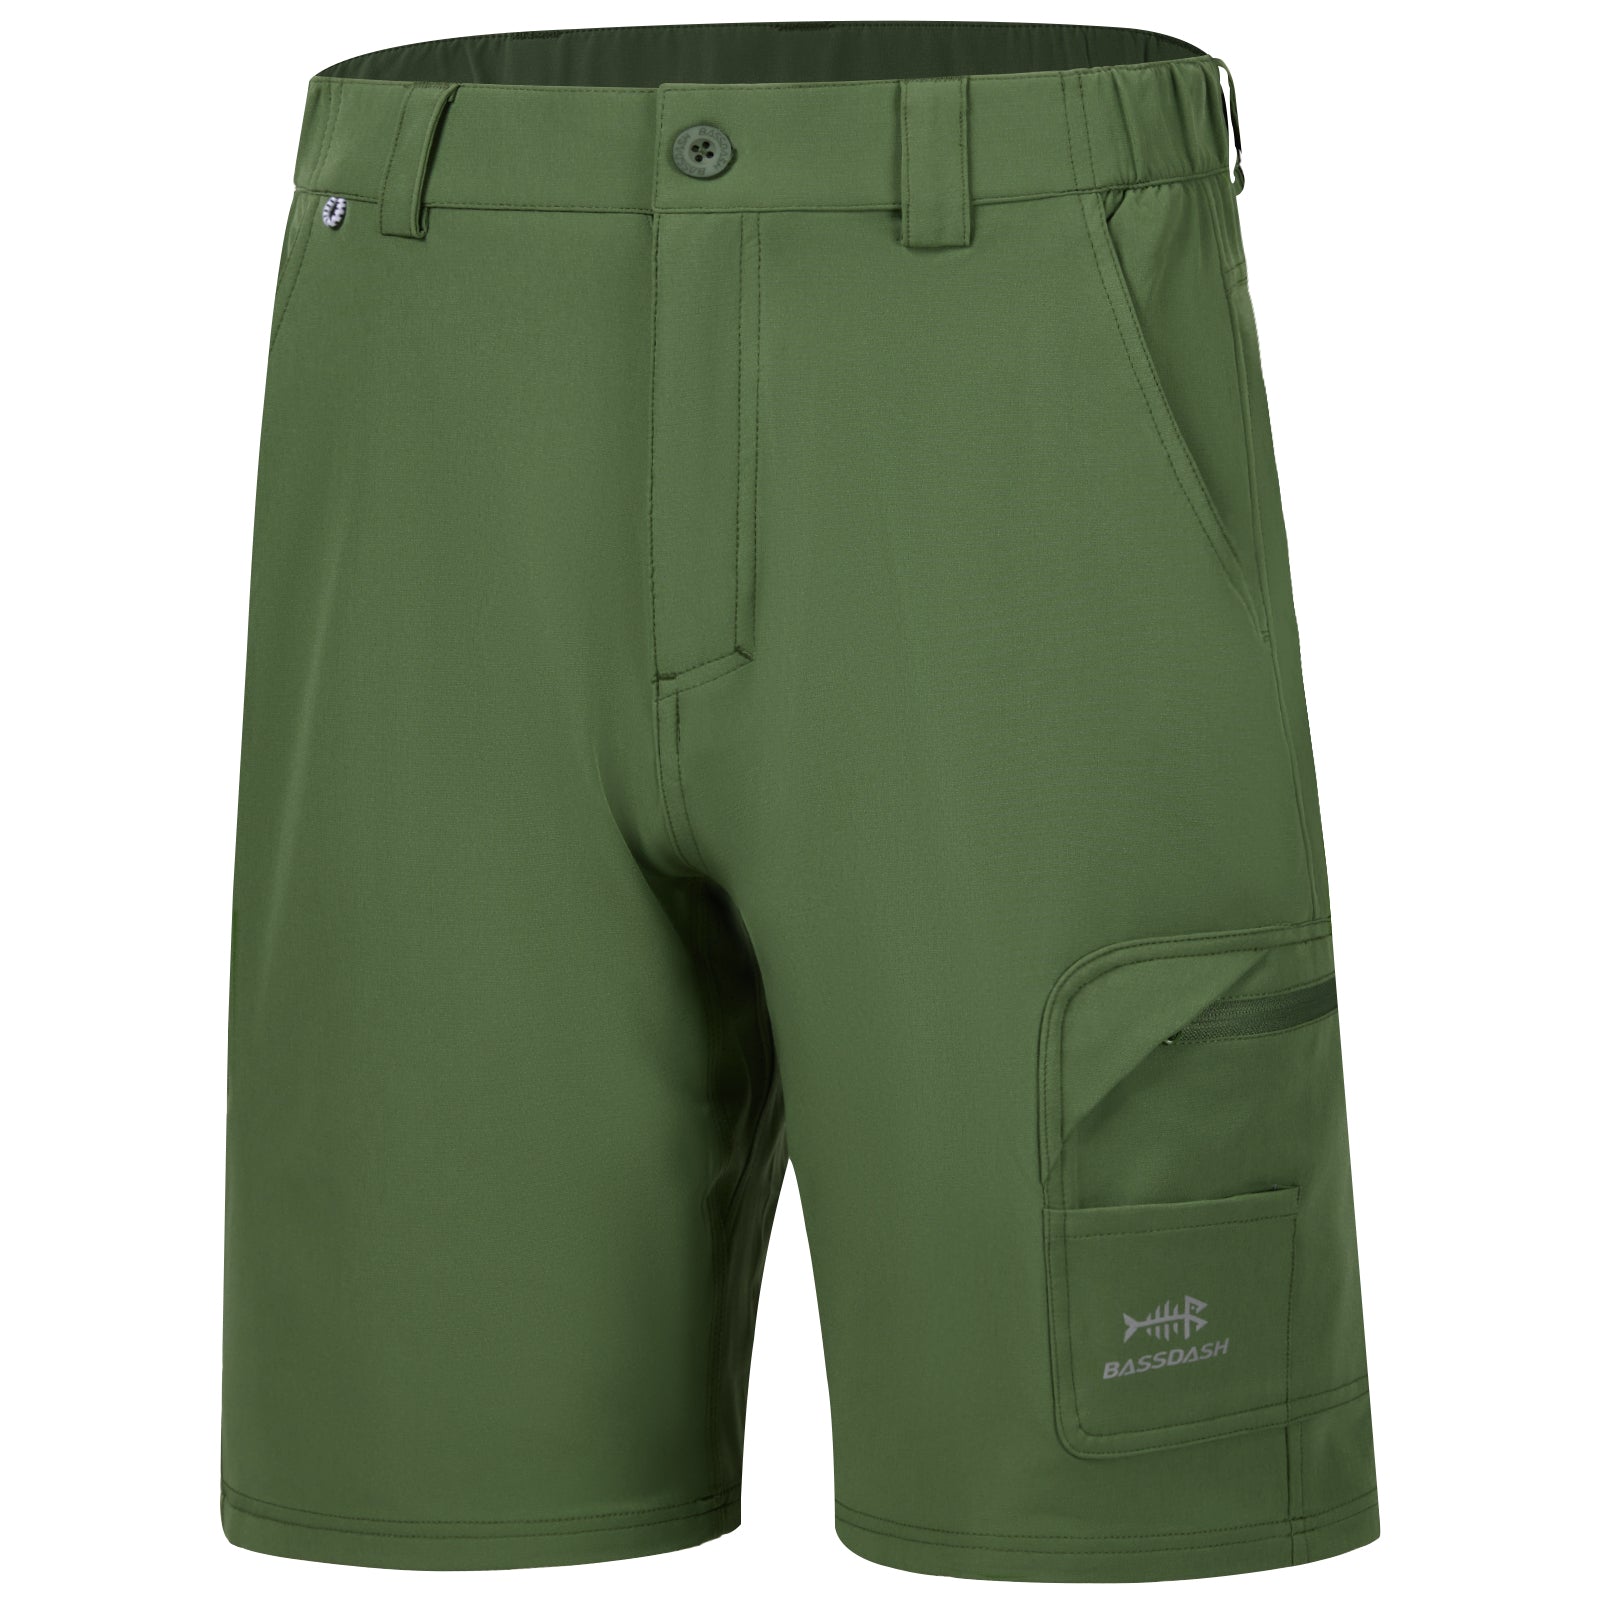 Bassdash Men's Cargo Shorts with Zip Pockets Quick Dry Water Resistant FP01M Olive / S (30-32)W x 10.5L